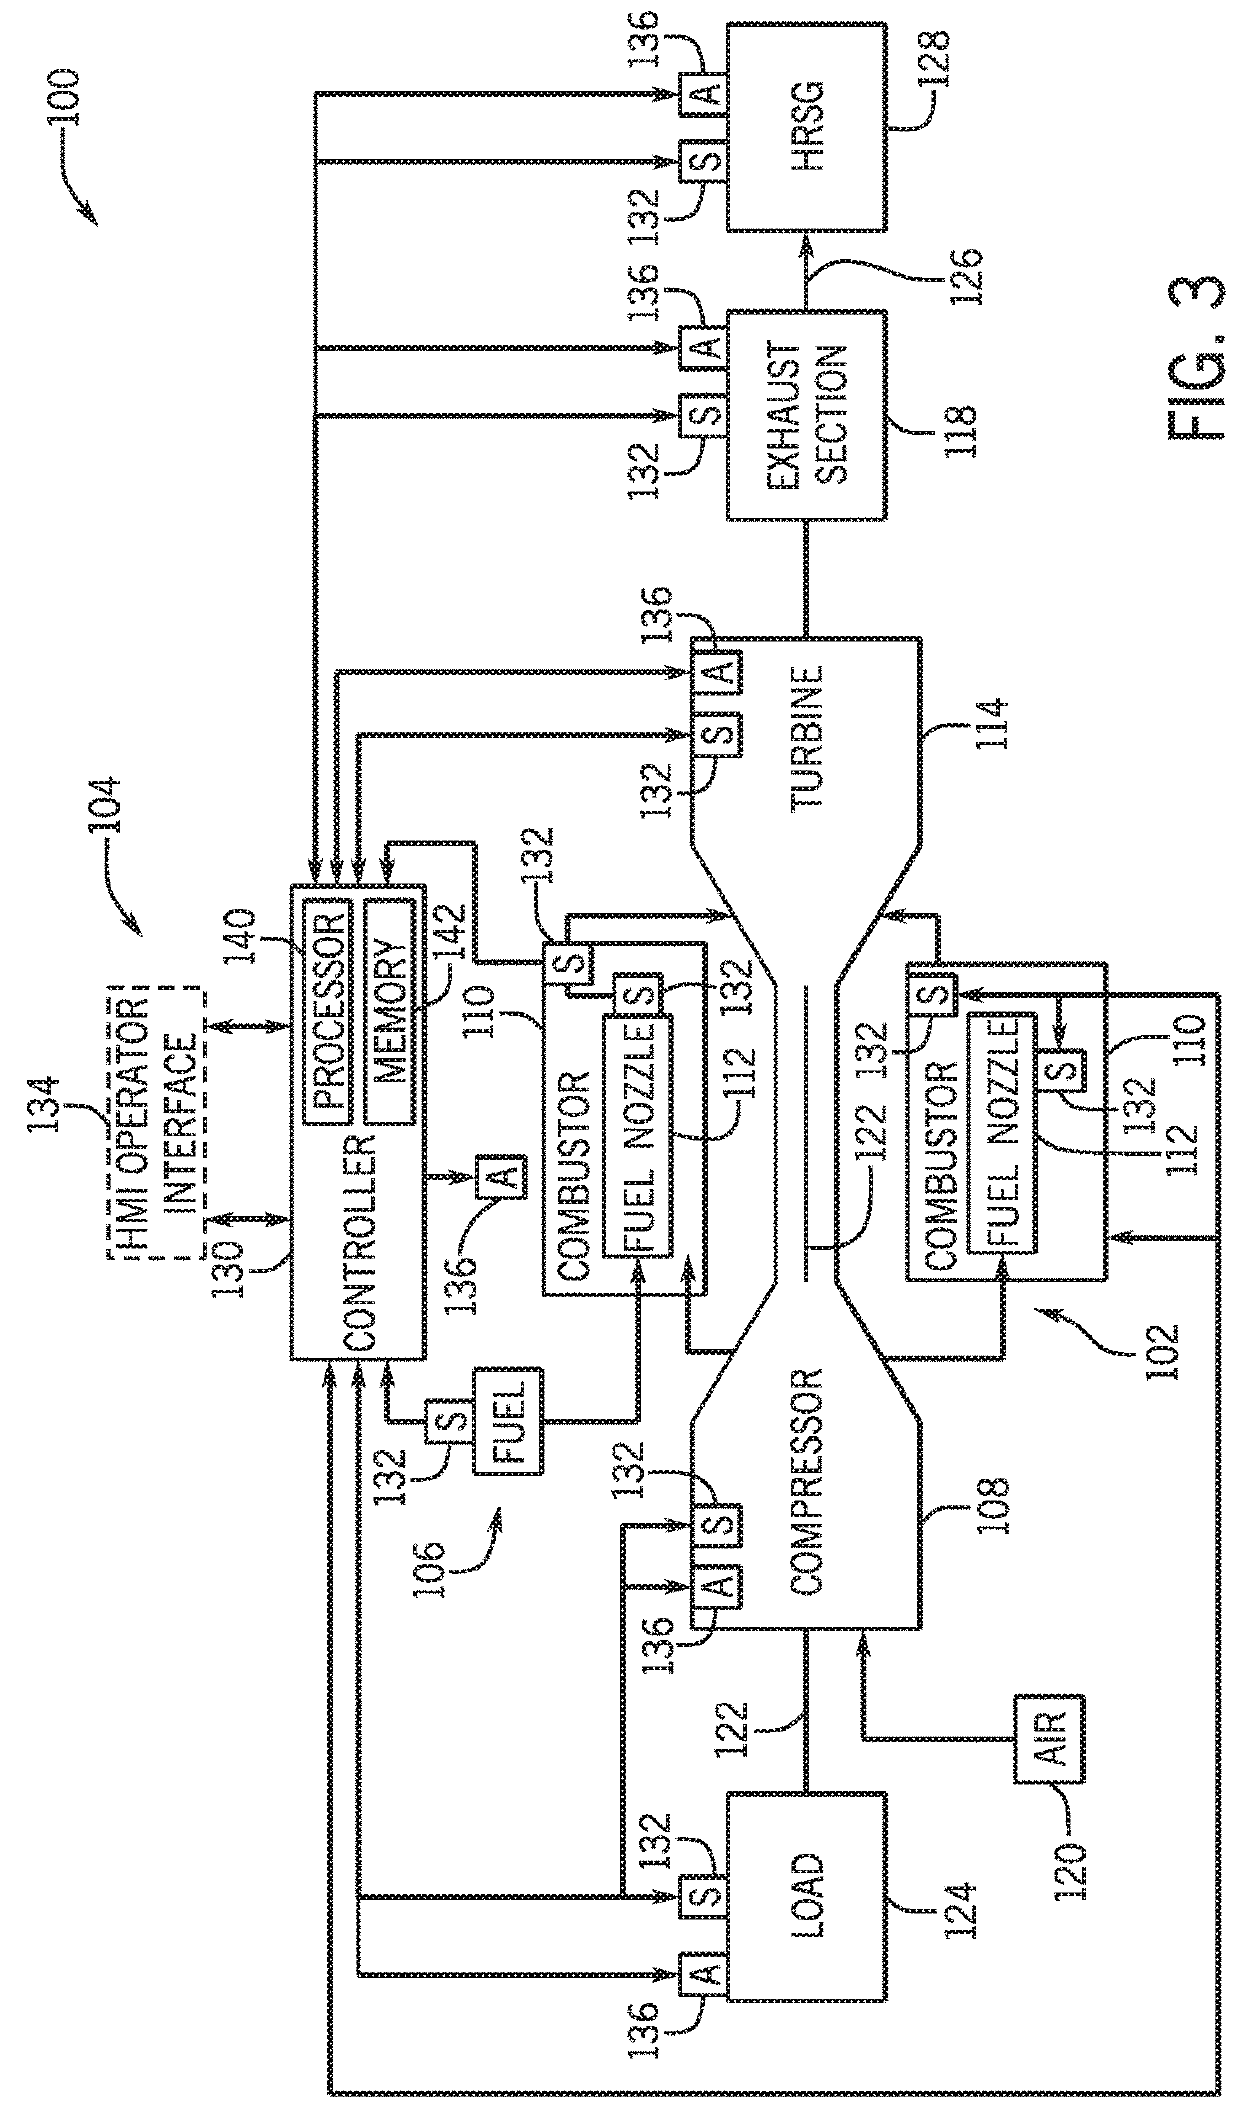 Systems and methods for generating association types to portions of a model